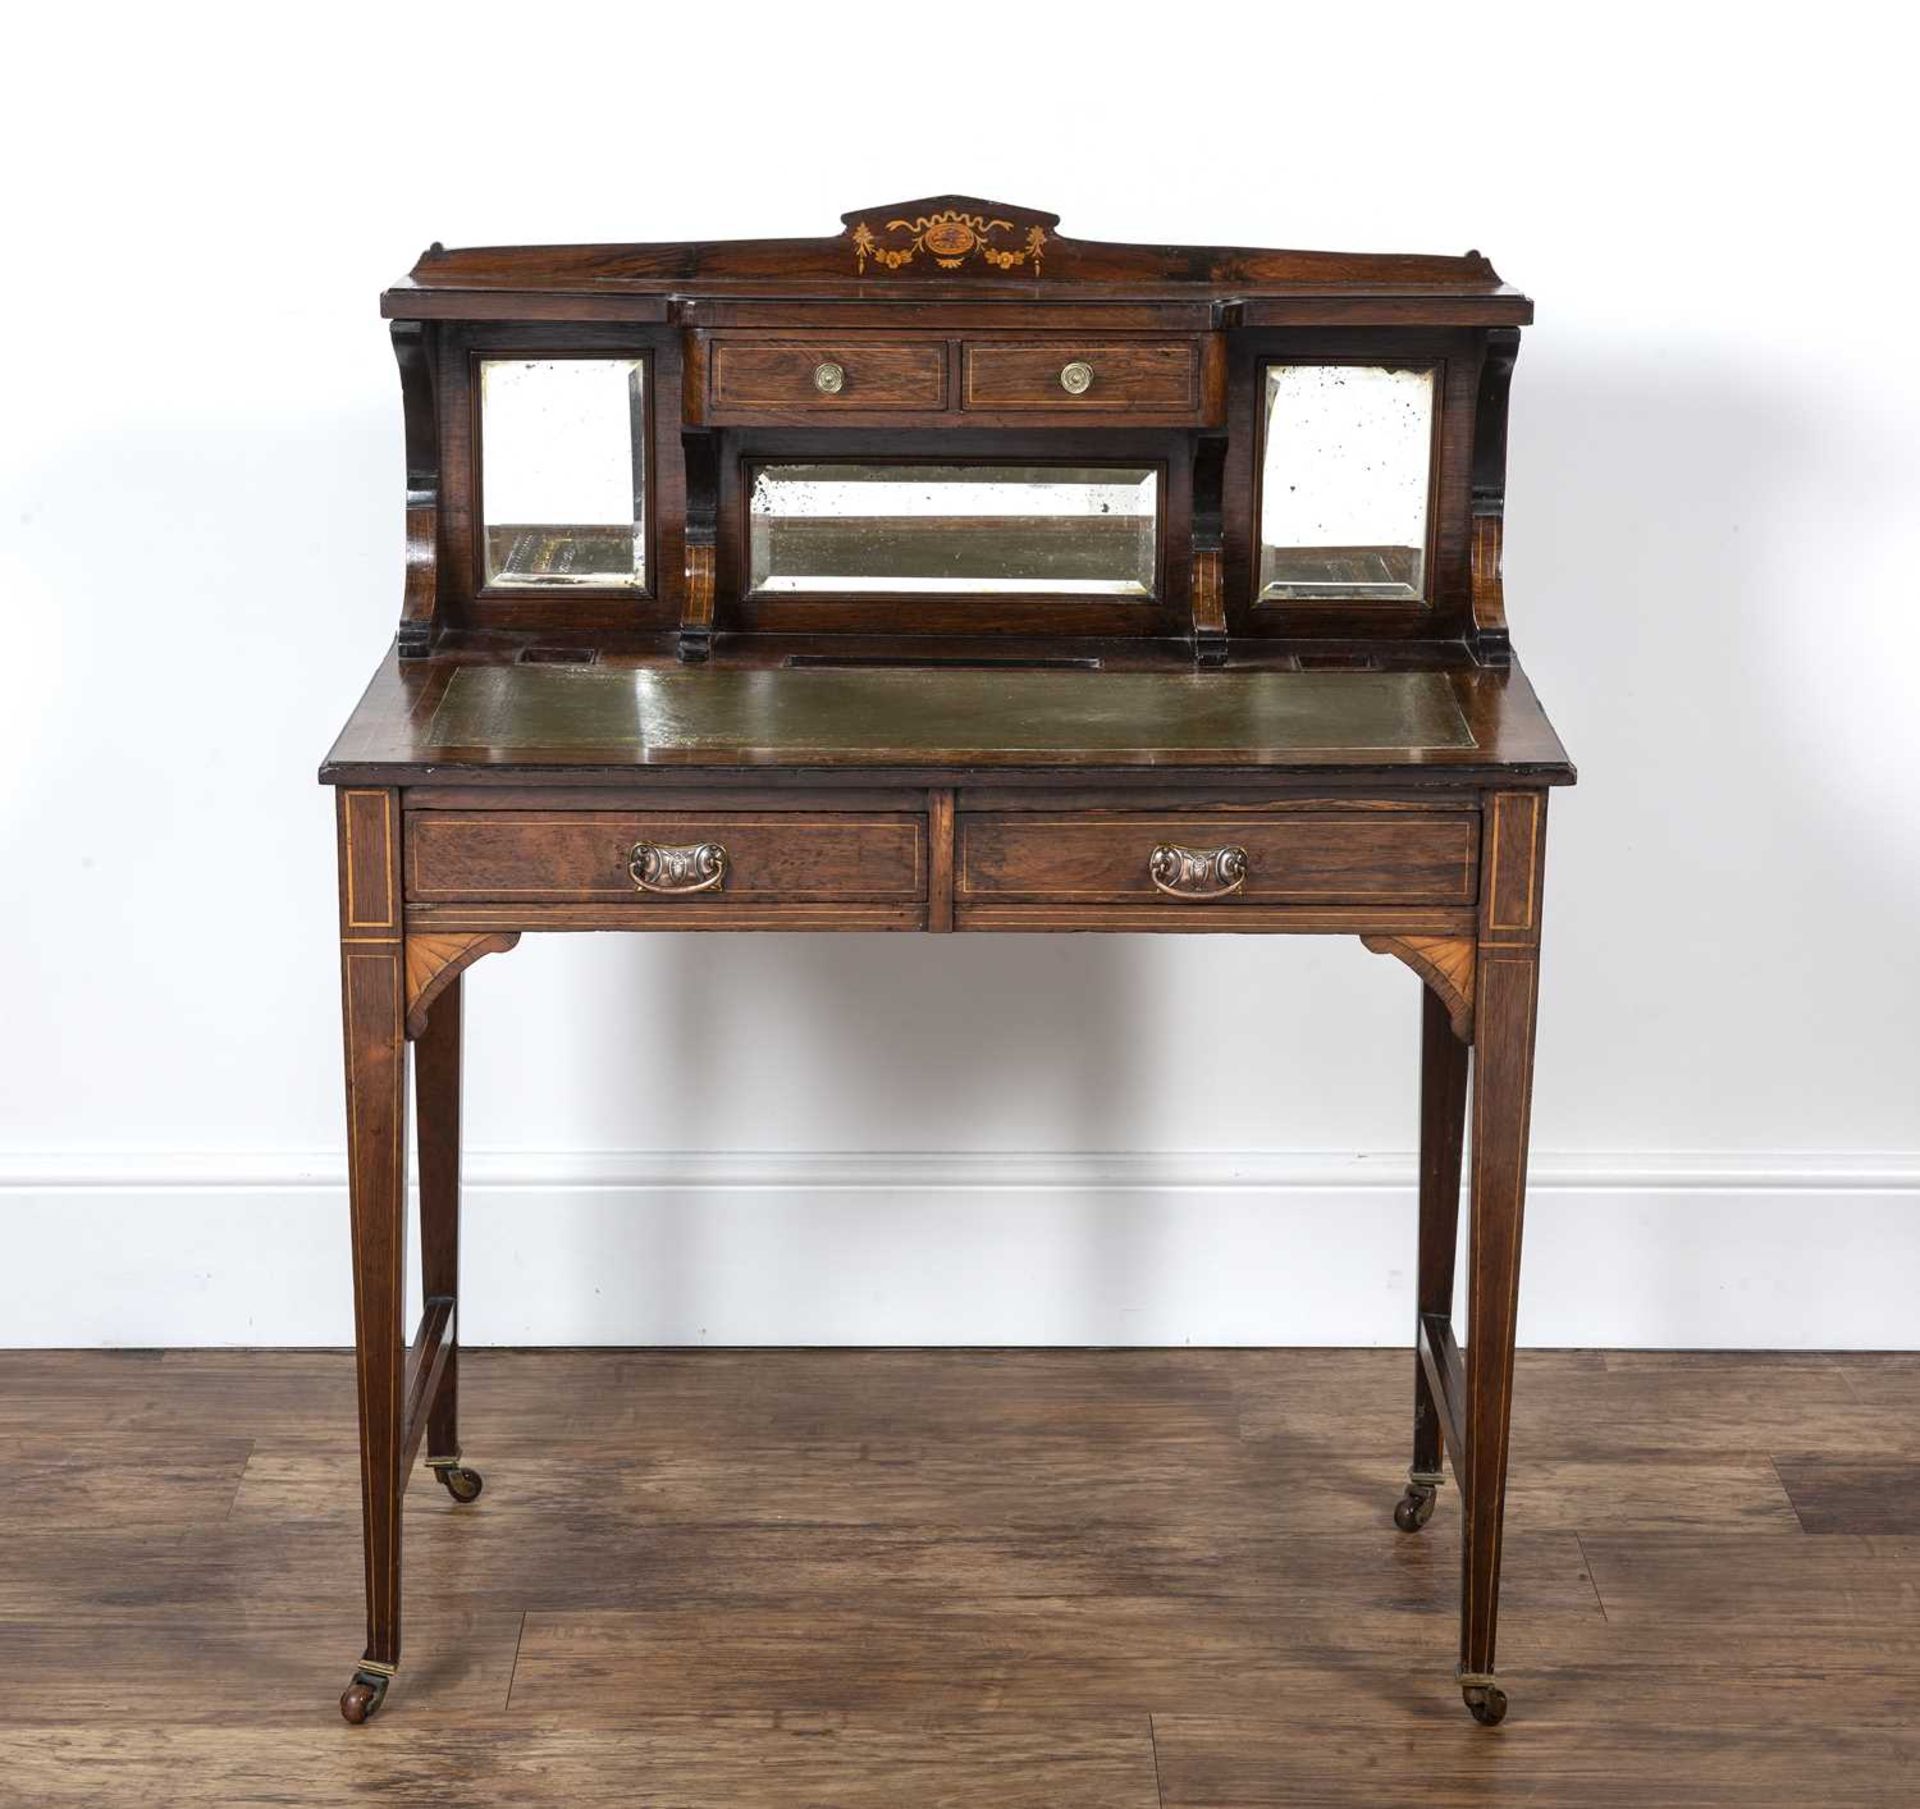 Rosewood and marquetry Bonheur du jour Victorian, with mirrored galleried back, two frieze